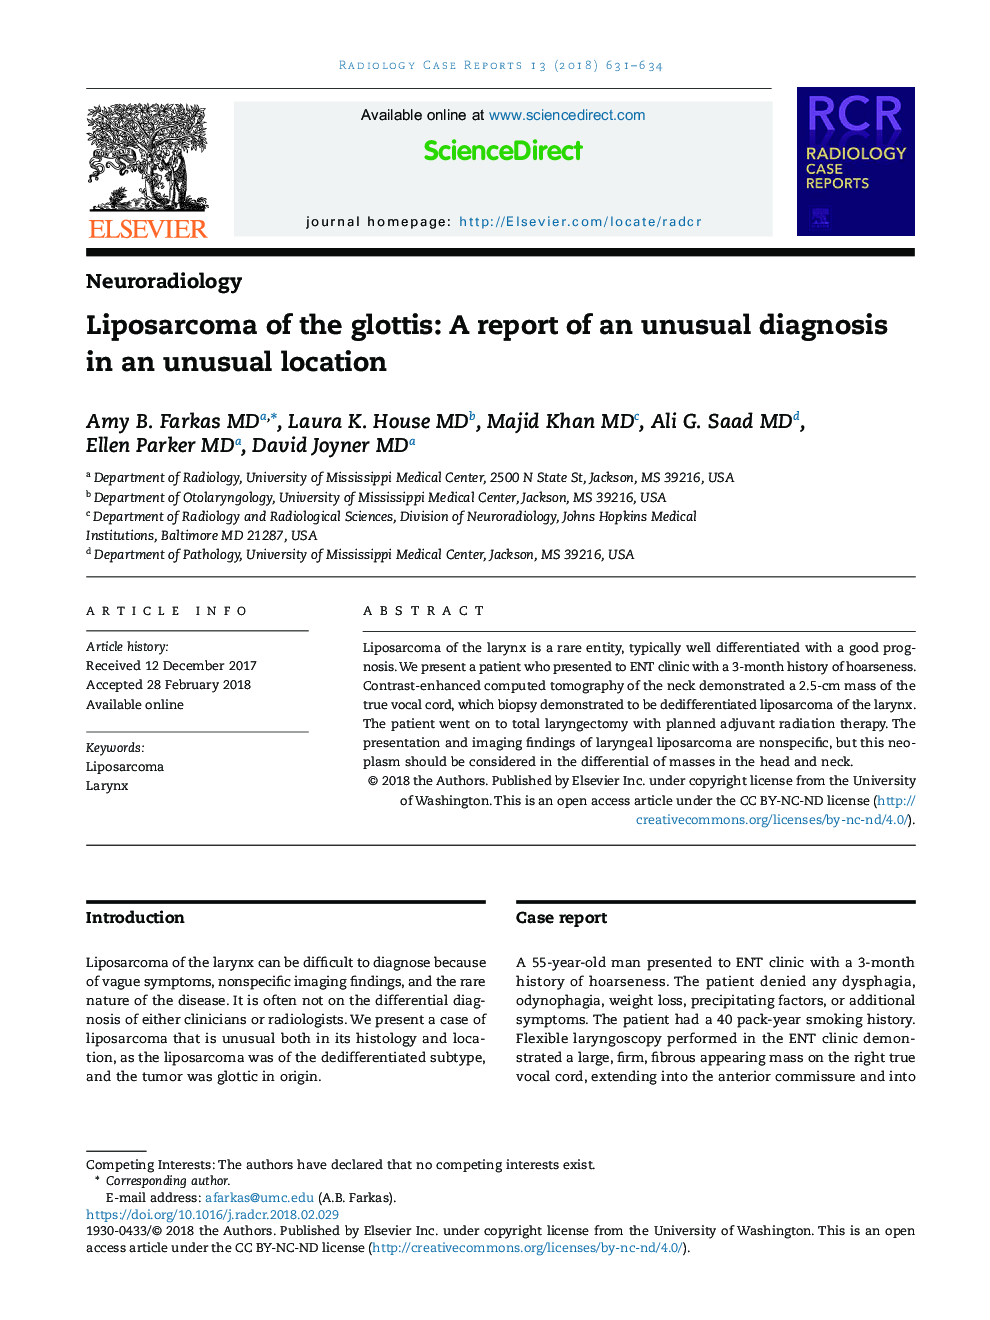 Liposarcoma of the glottis: A report of an unusual diagnosis in an unusual location